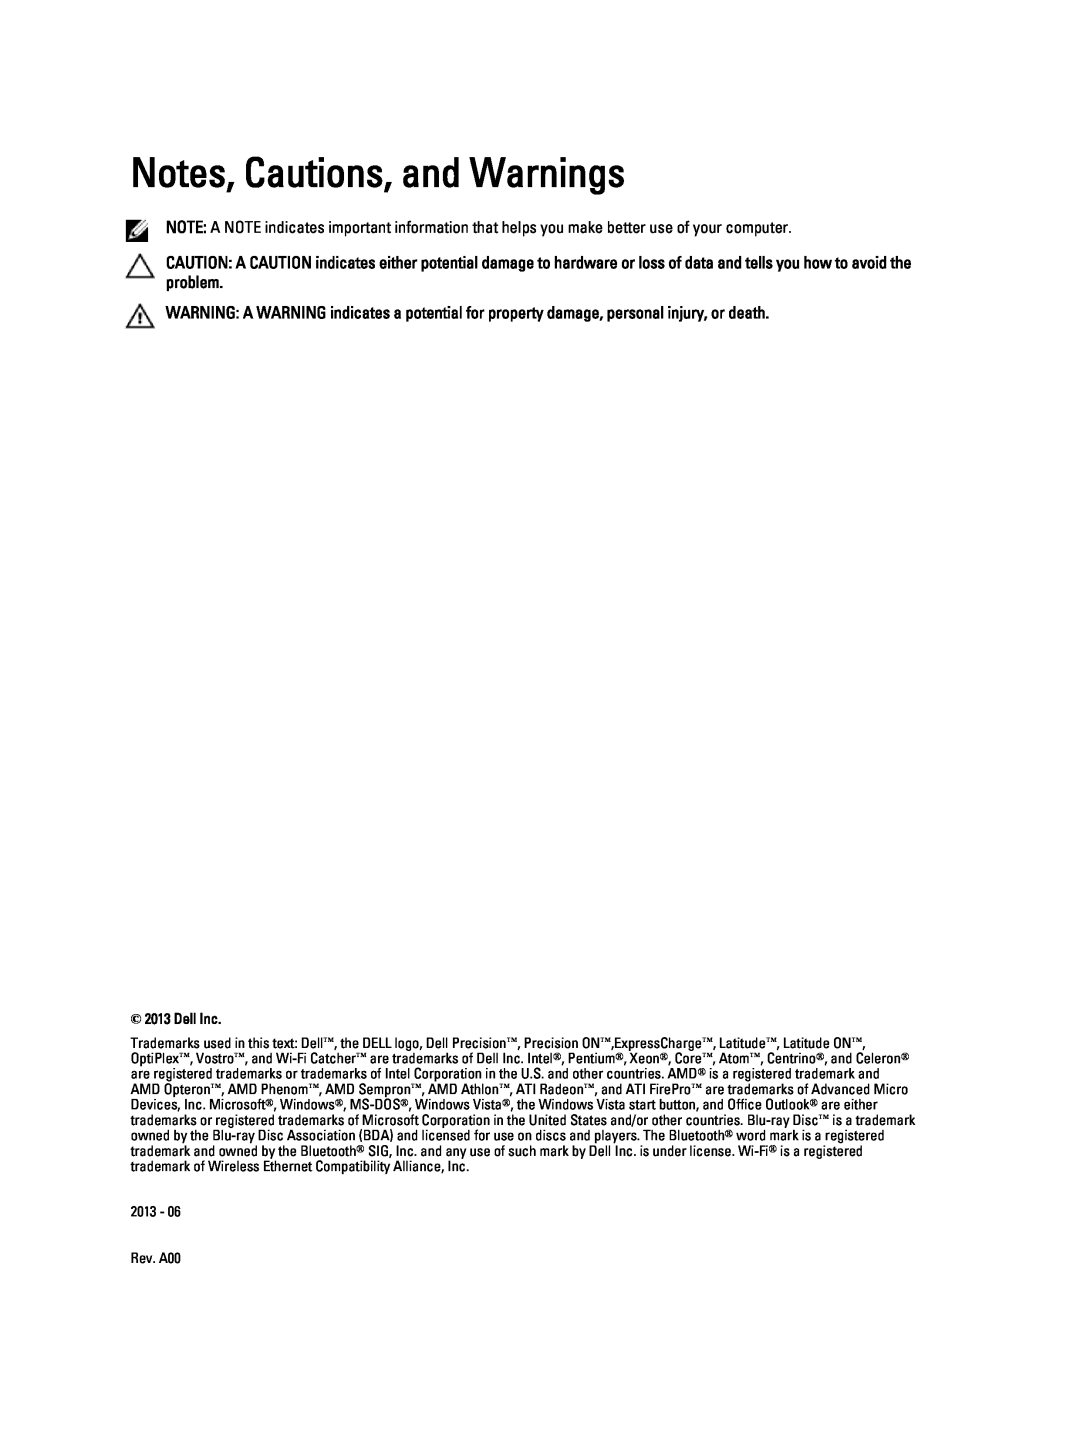 Dell T1700 owner manual Notes, Cautions, and Warnings, Dell Inc 